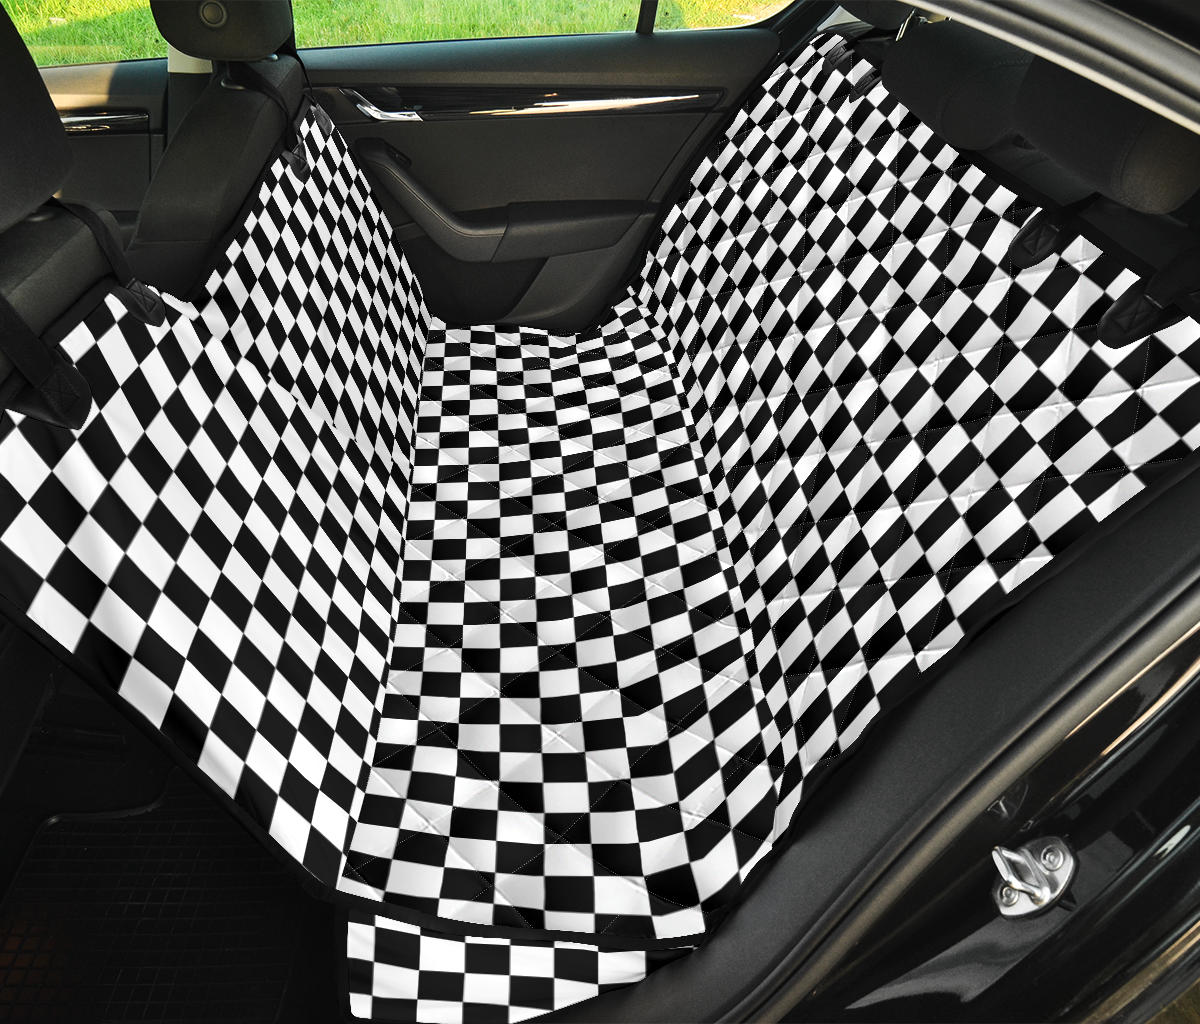 B&W Large Checkers Car Pet Seat Cover